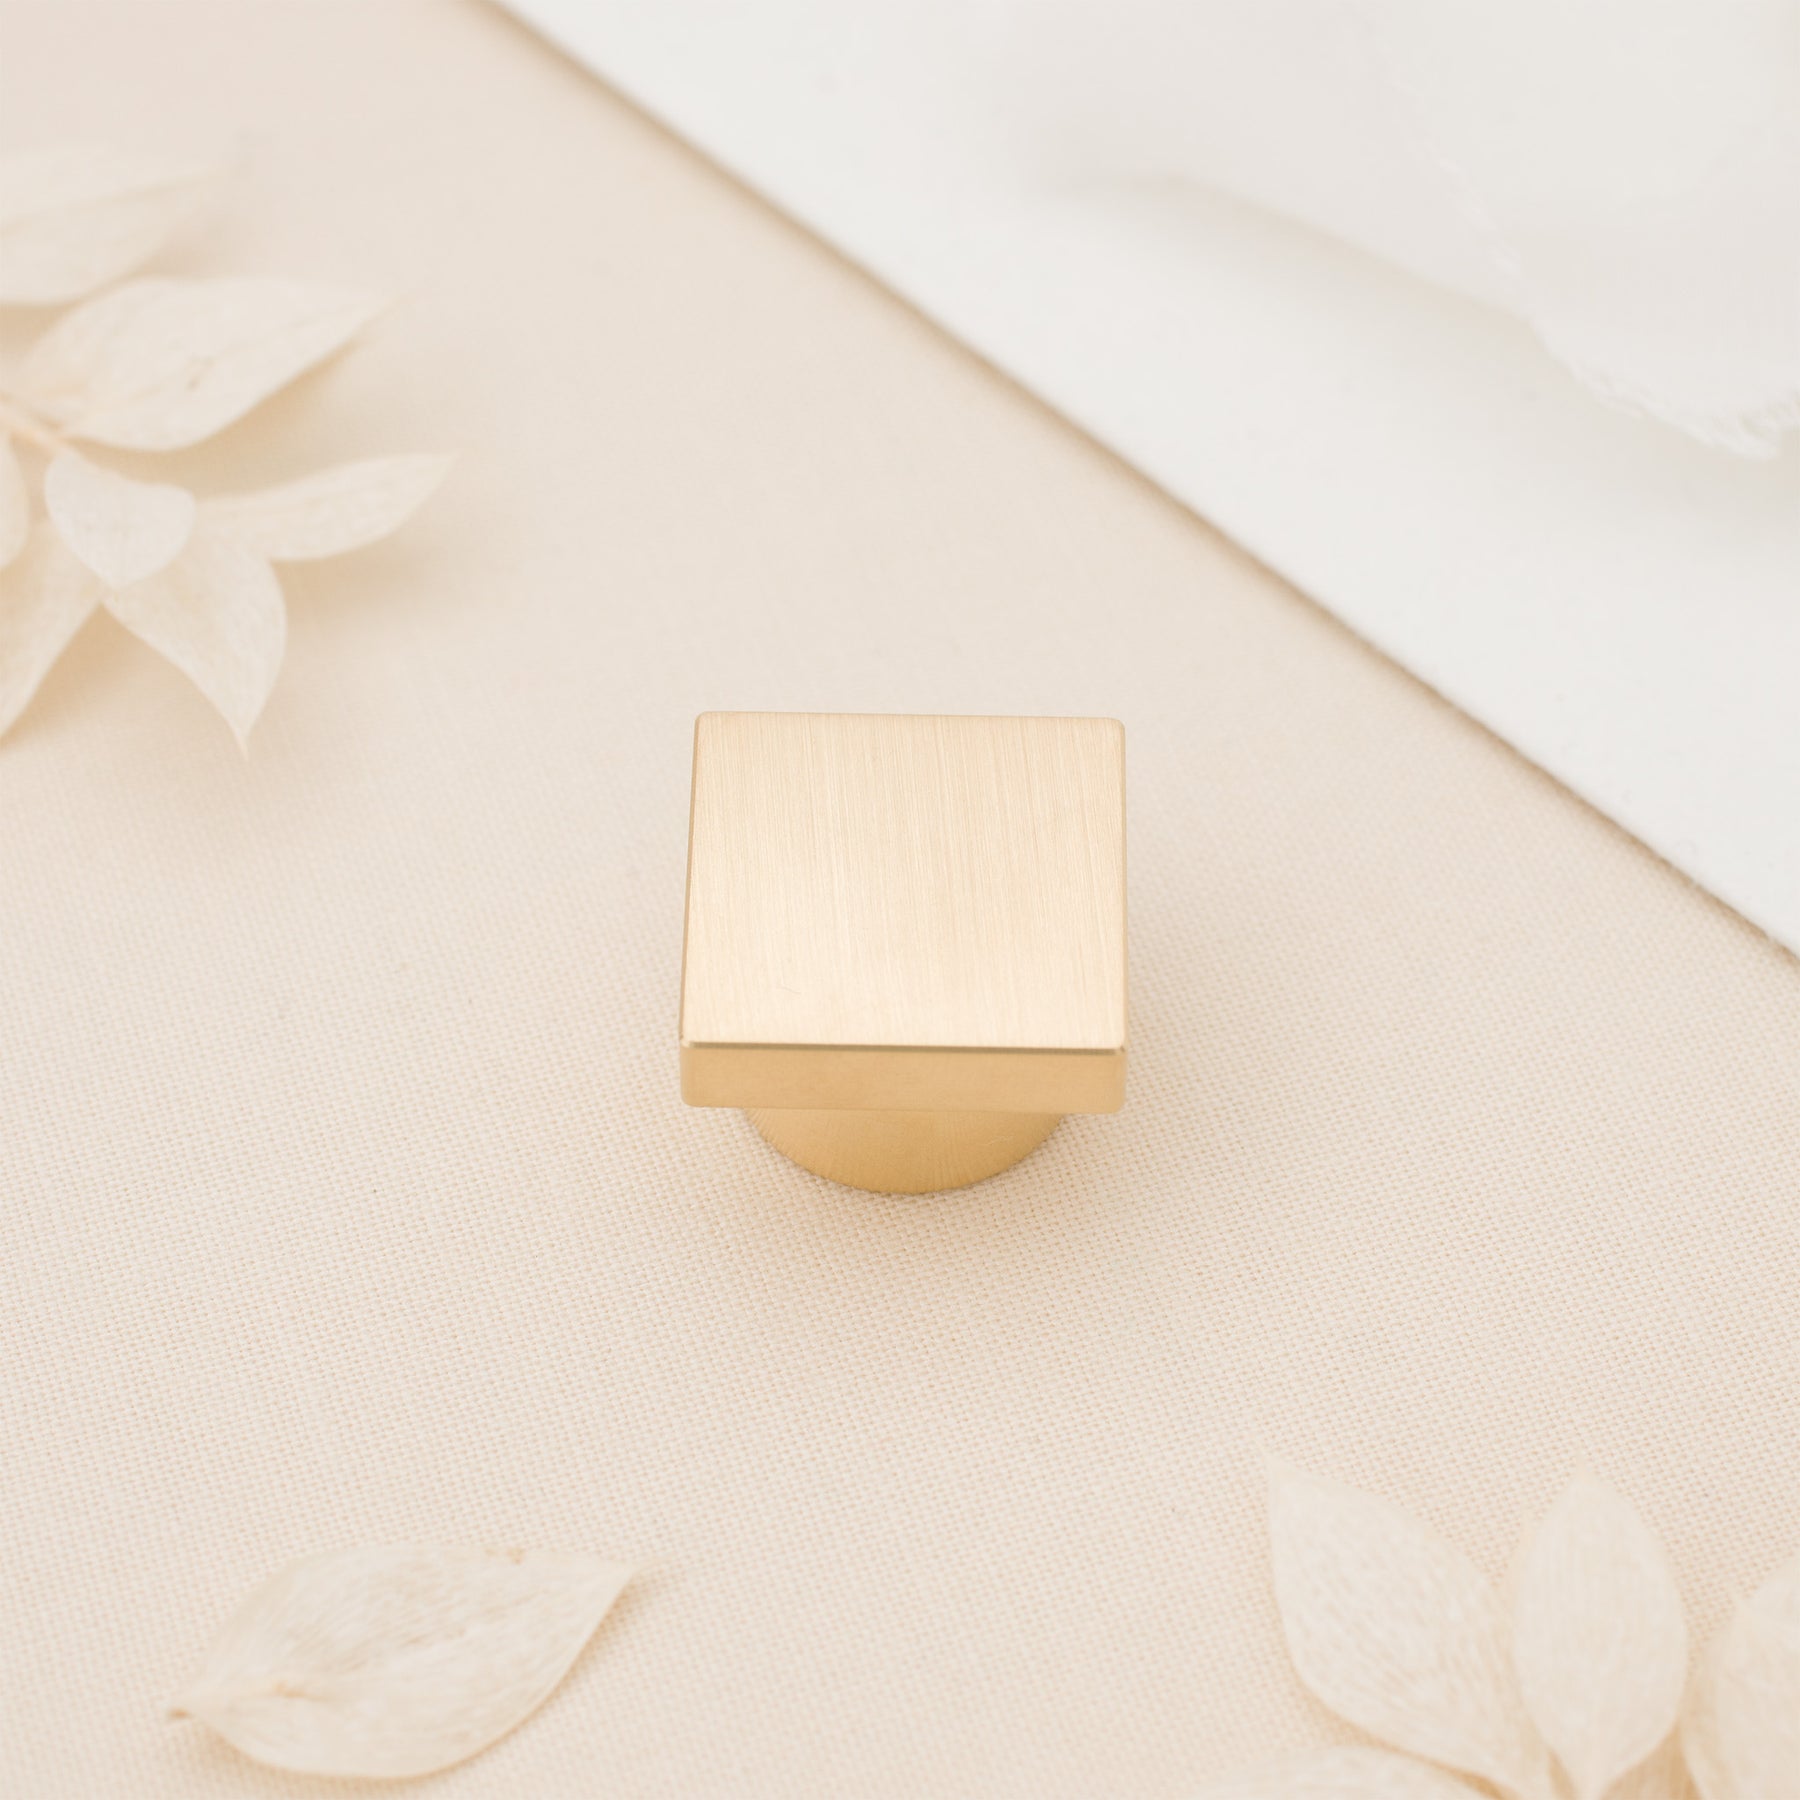 Design Your Own Wax Stamp